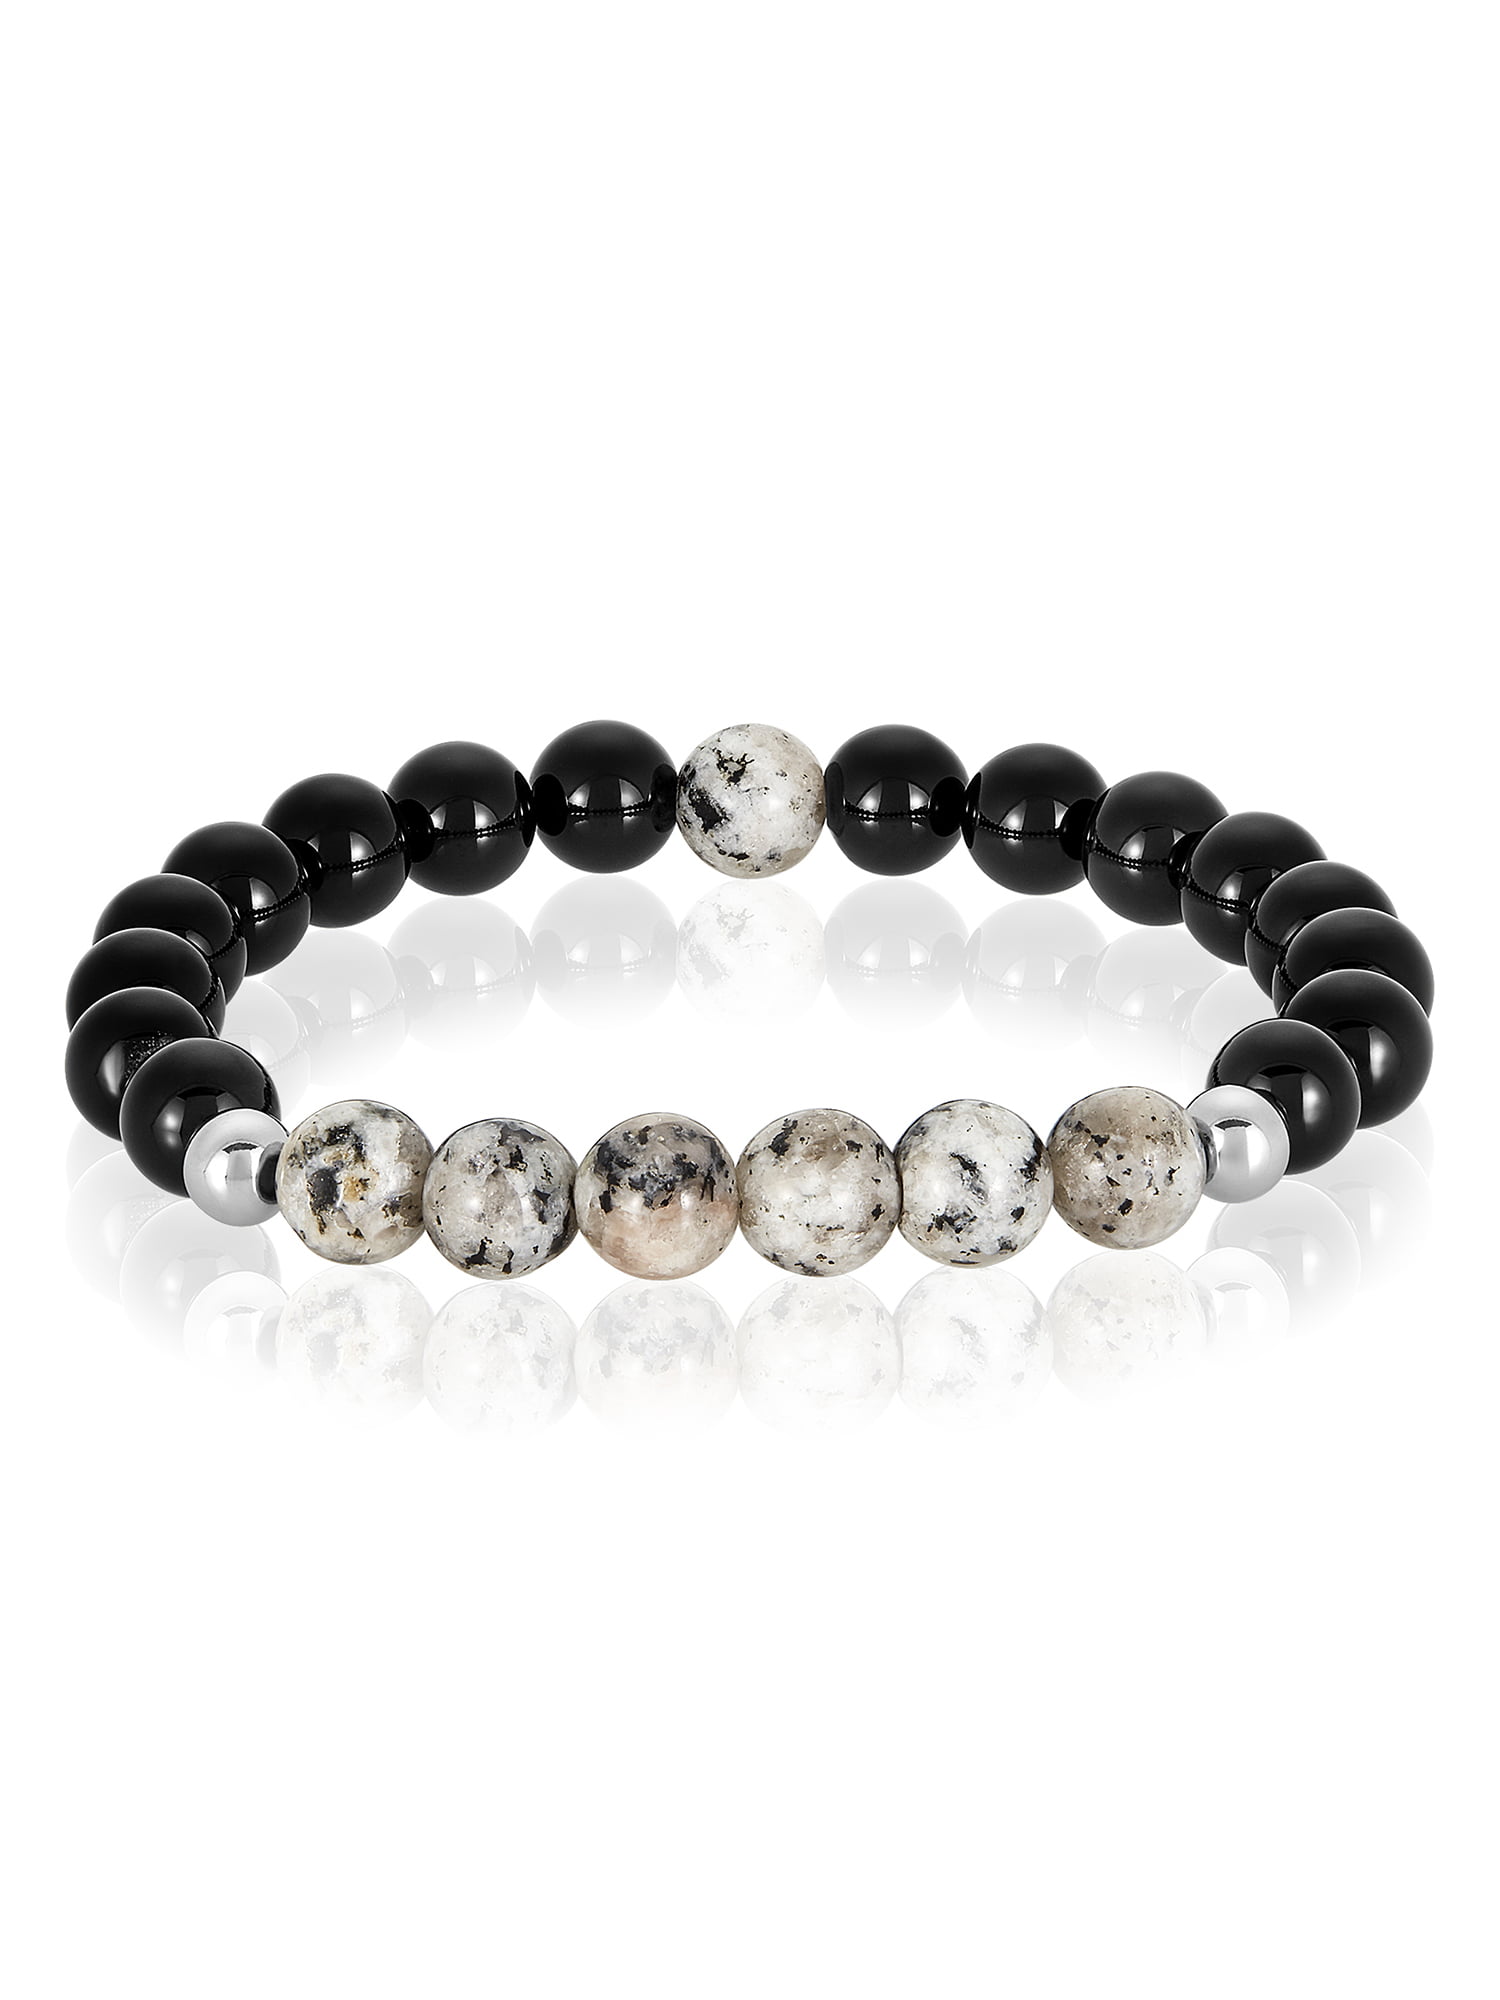 8mm Silver Hematite Adjustable Bracelet with Silver Buddha Accent